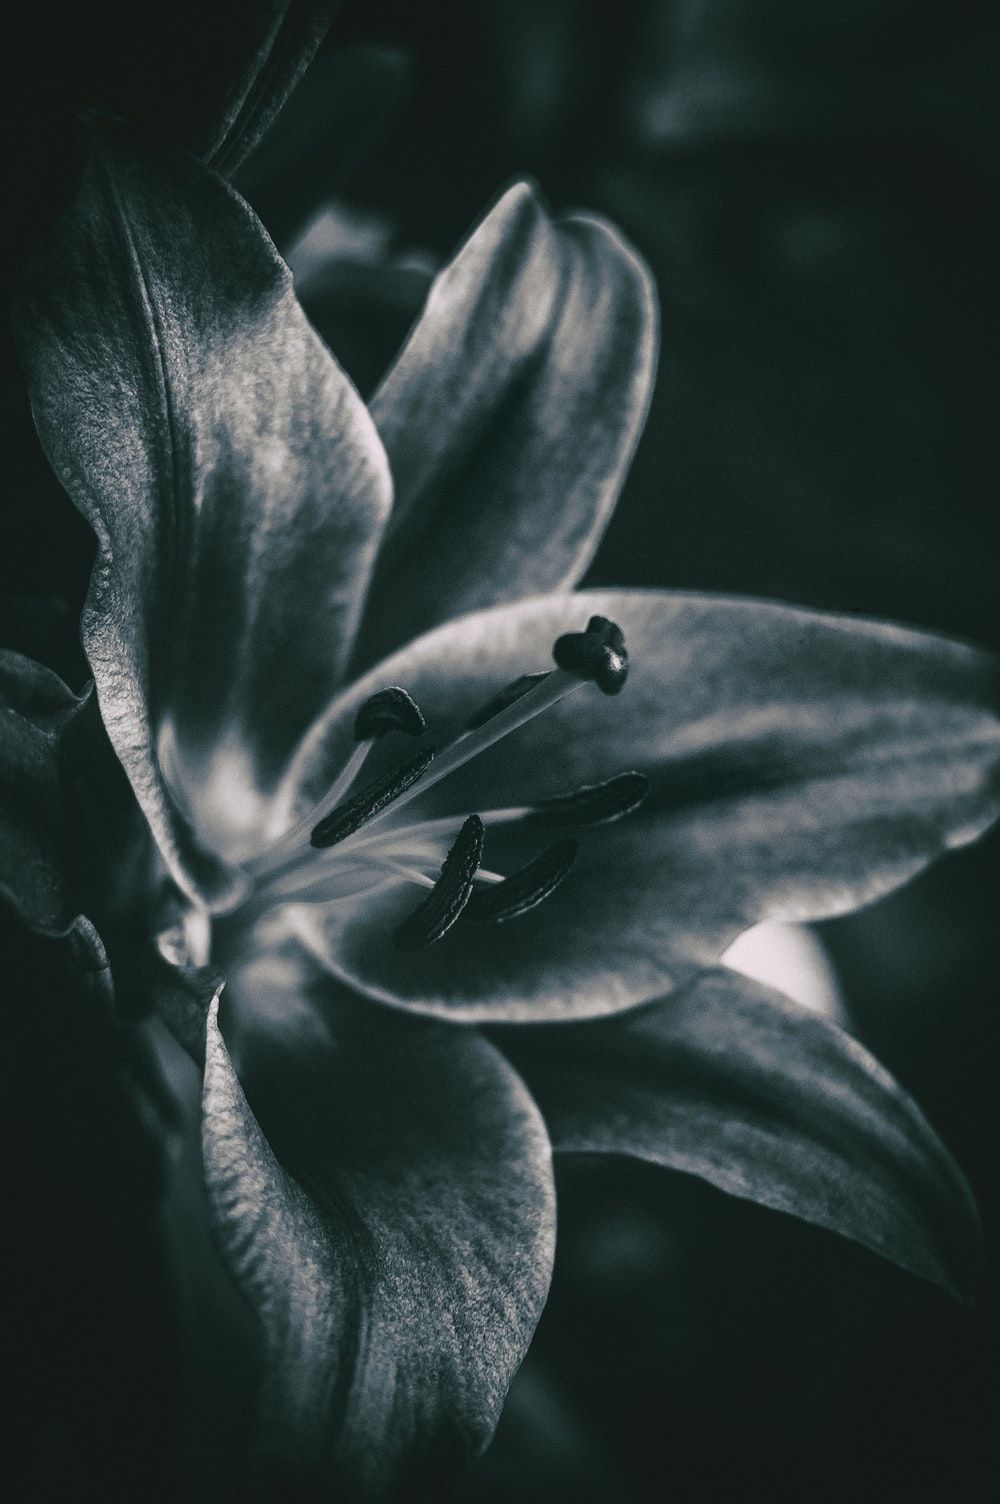 500+ Black And White Flower Pictures [HD]